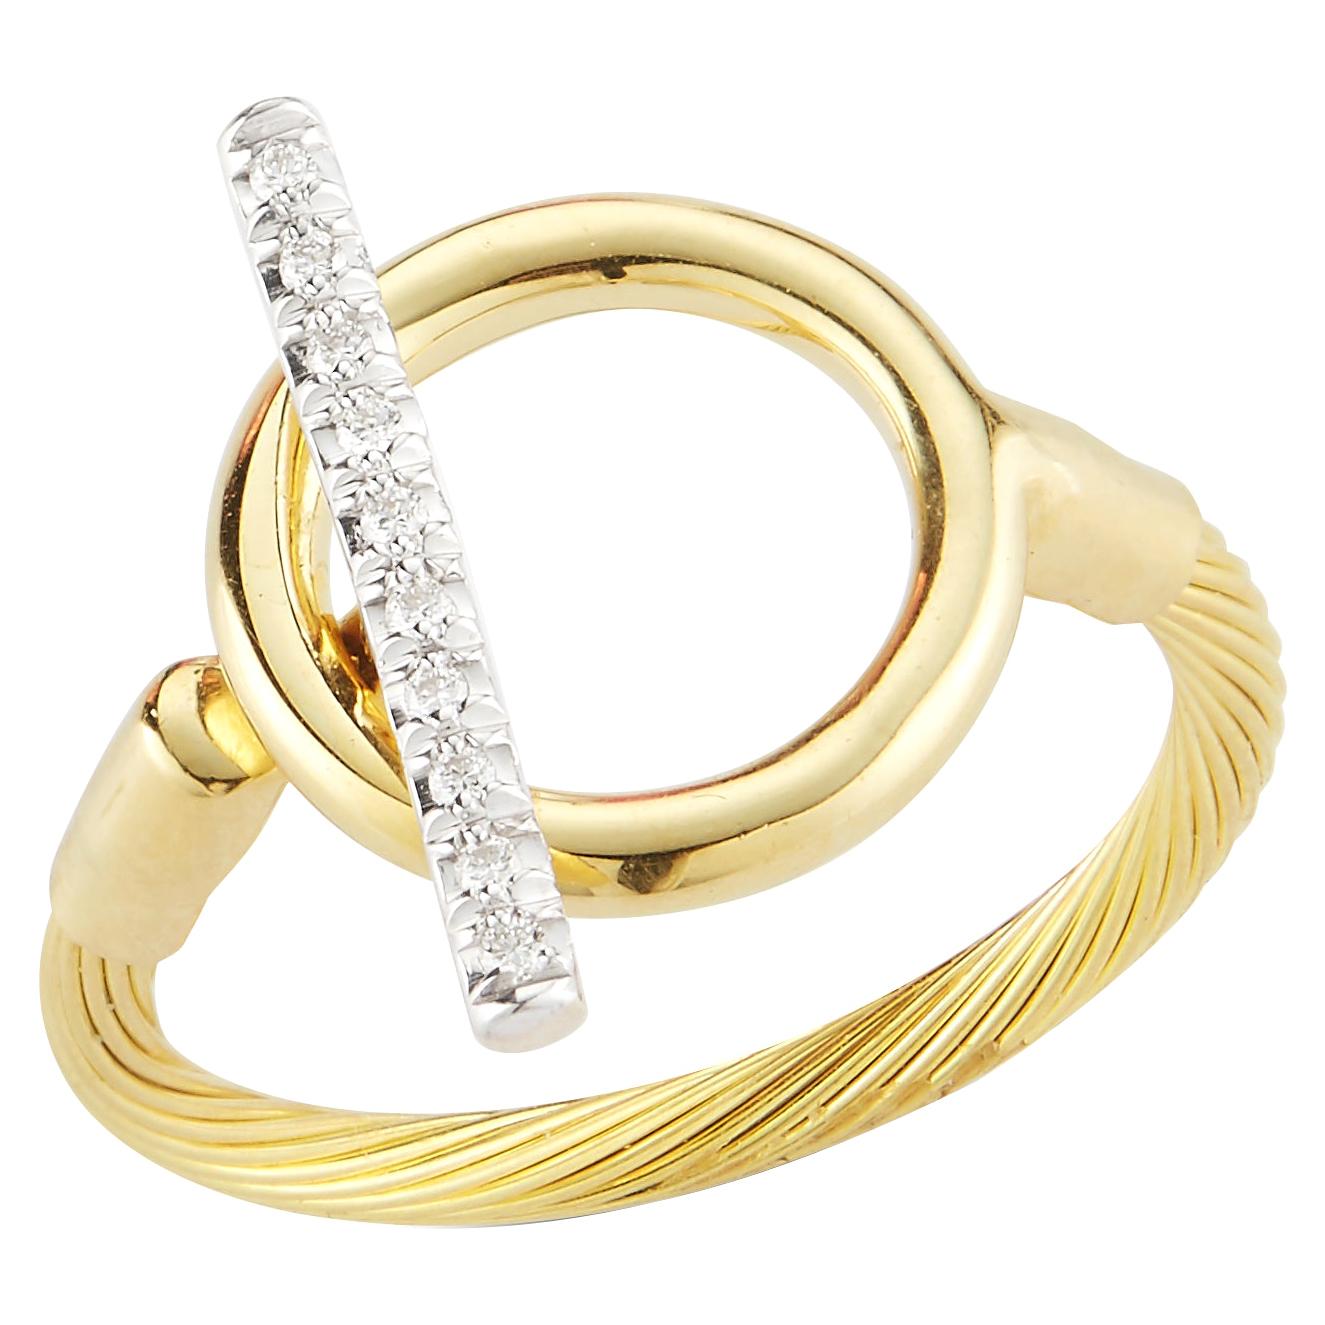 For Sale:  Hand-Crafted 14 Karat Yellow Gold Wire Toggle Ring